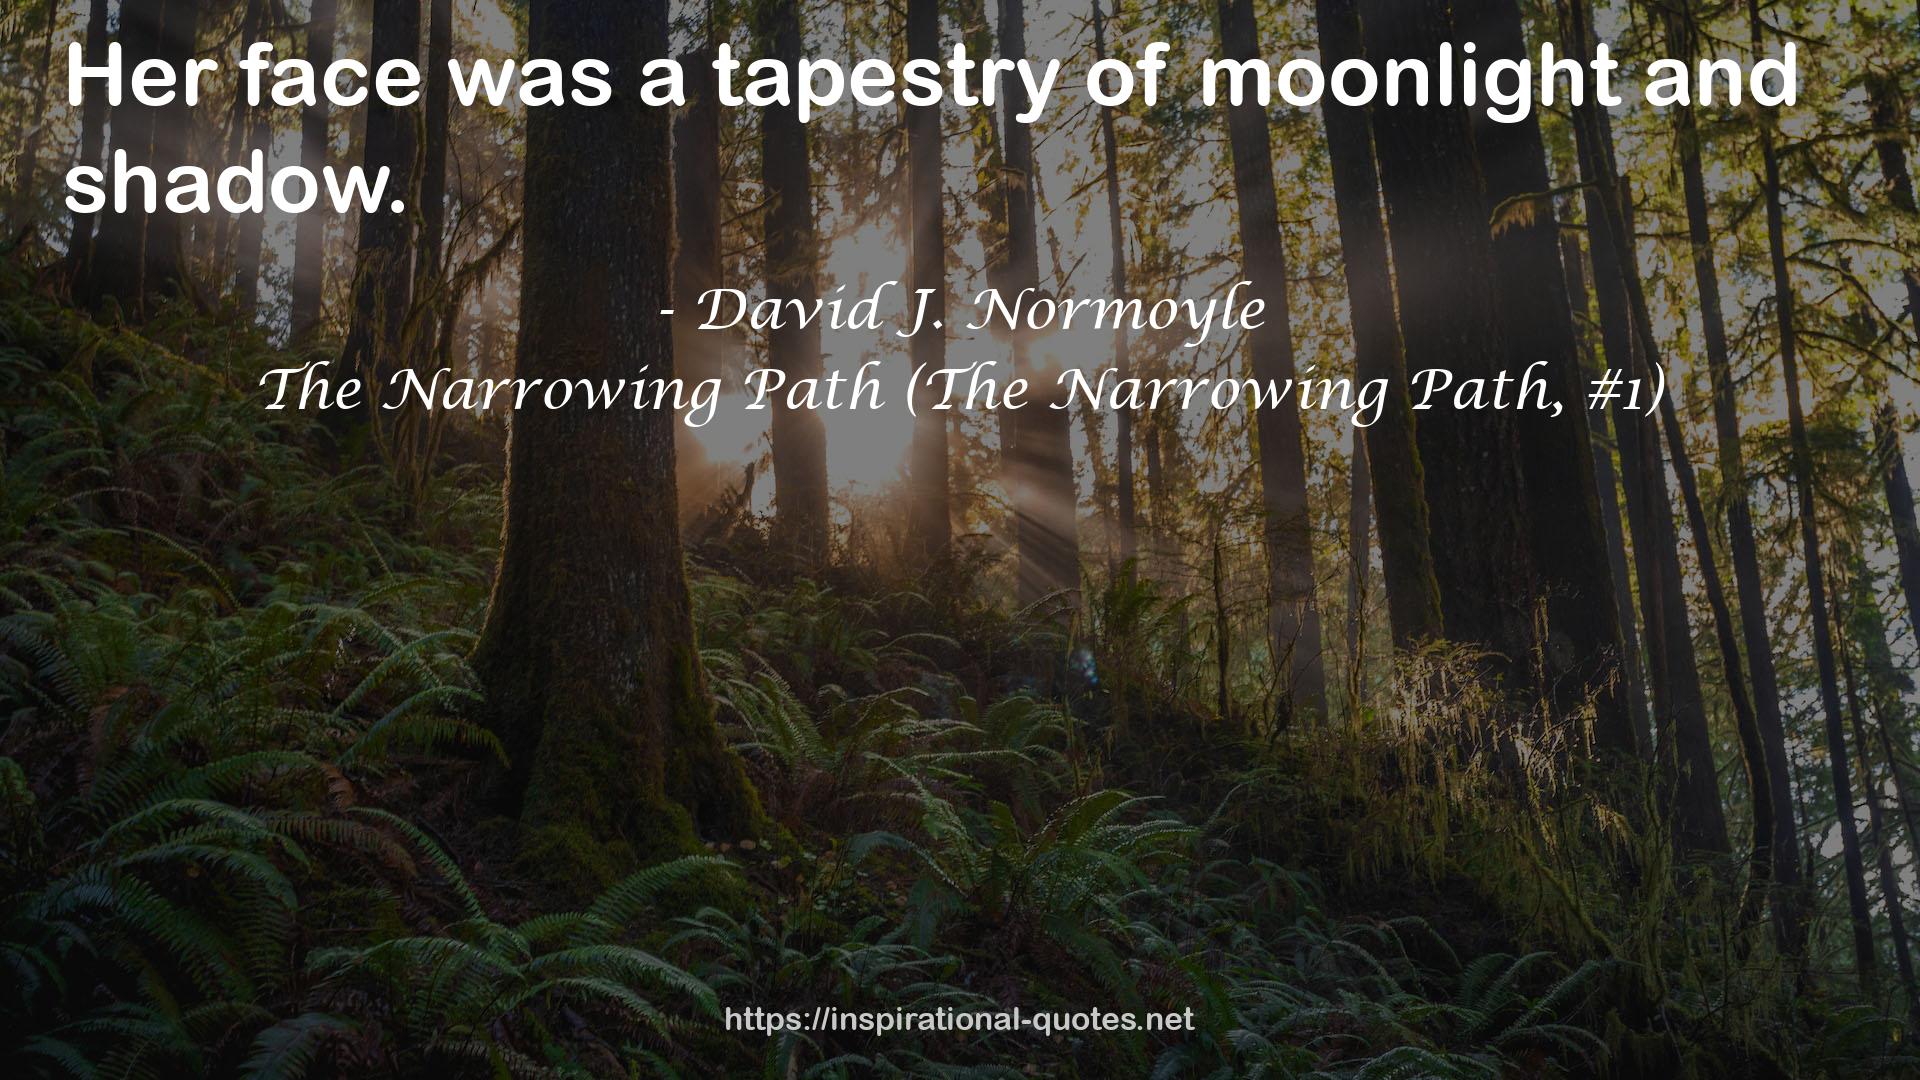 The Narrowing Path (The Narrowing Path, #1) QUOTES